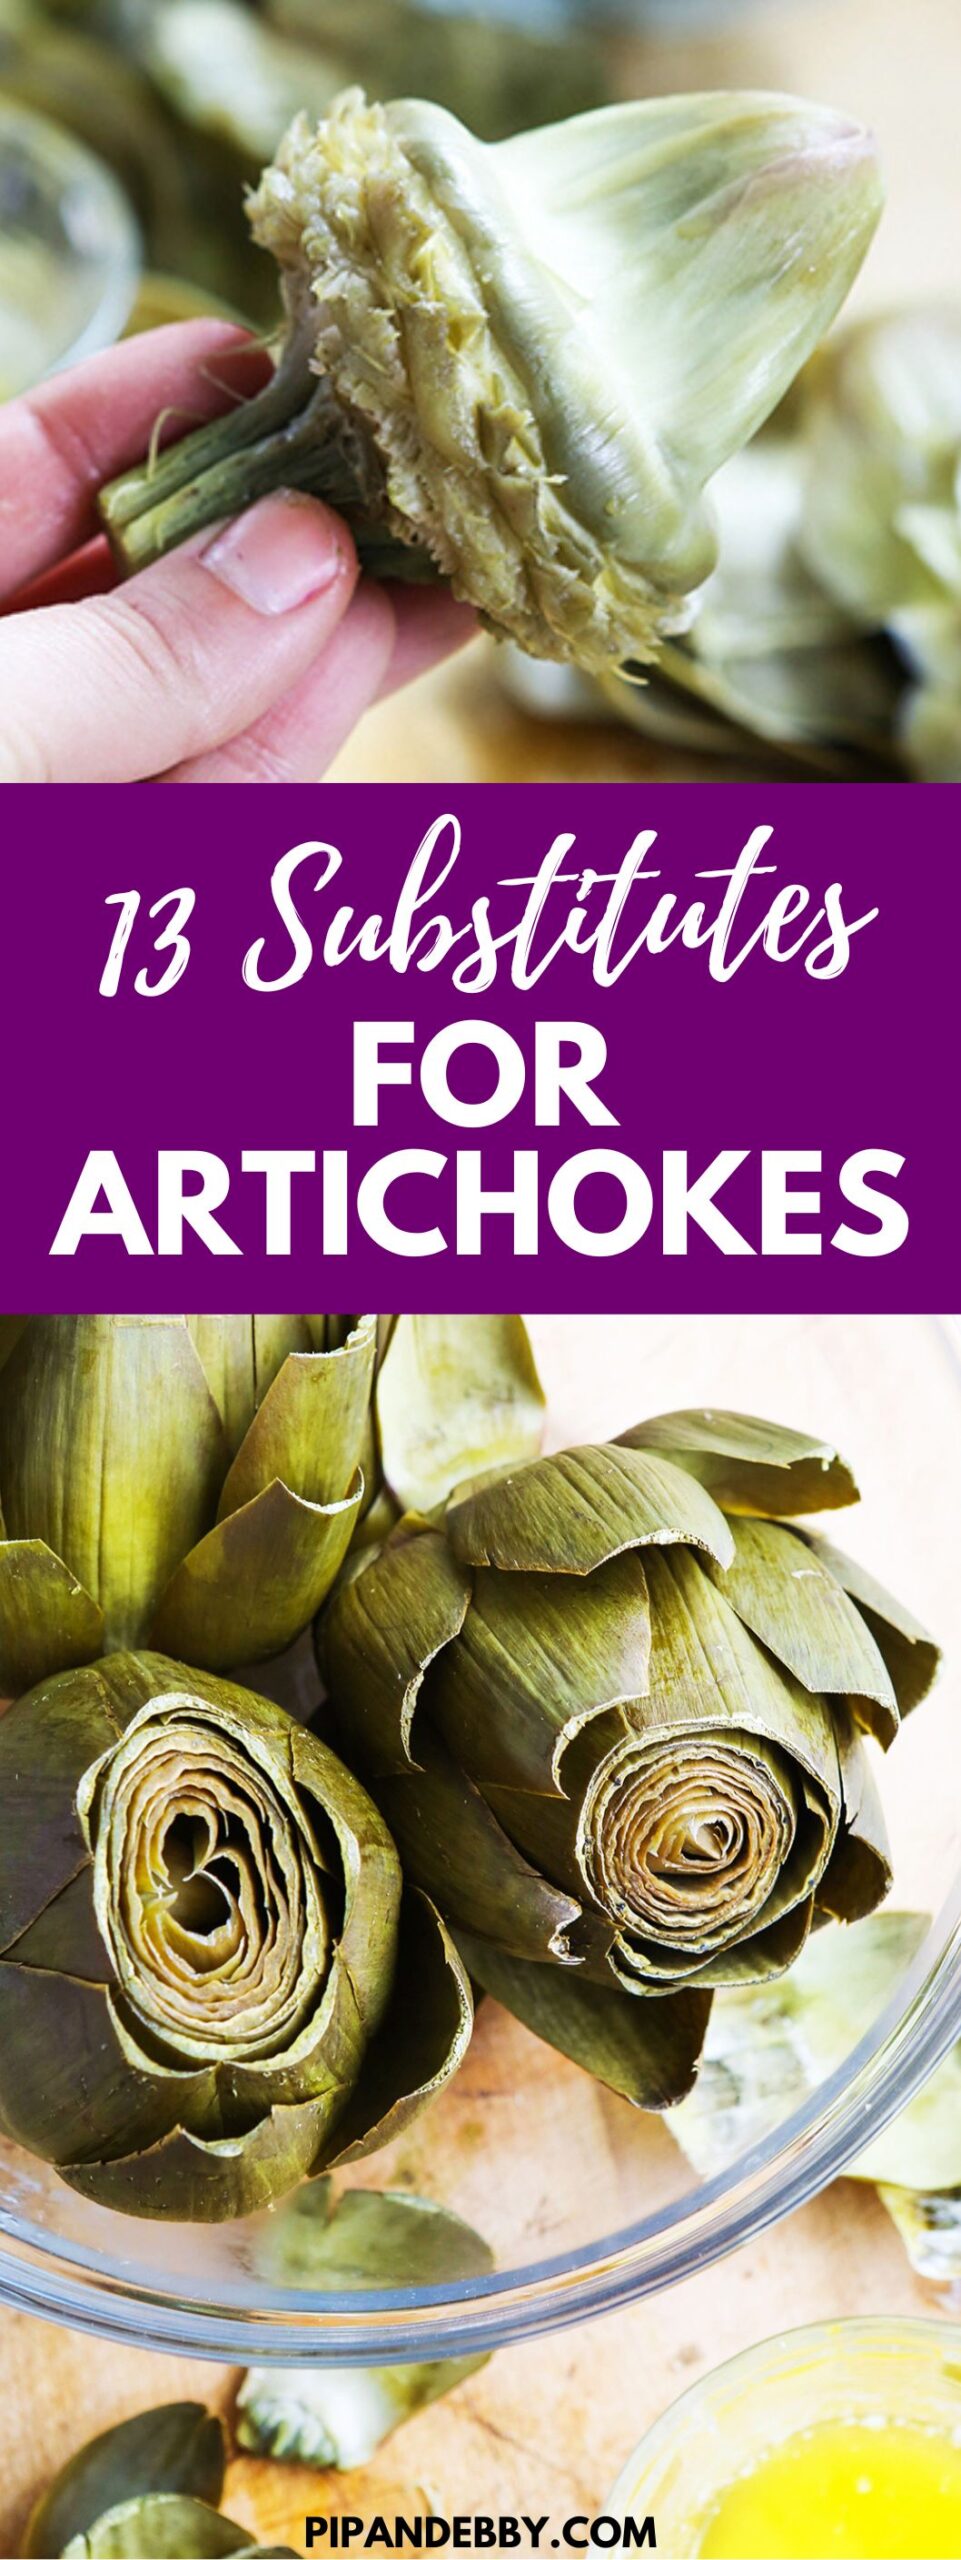 Two photos of cooked artichokes with text overlay reading: 13 Substitutes for Artichokes.